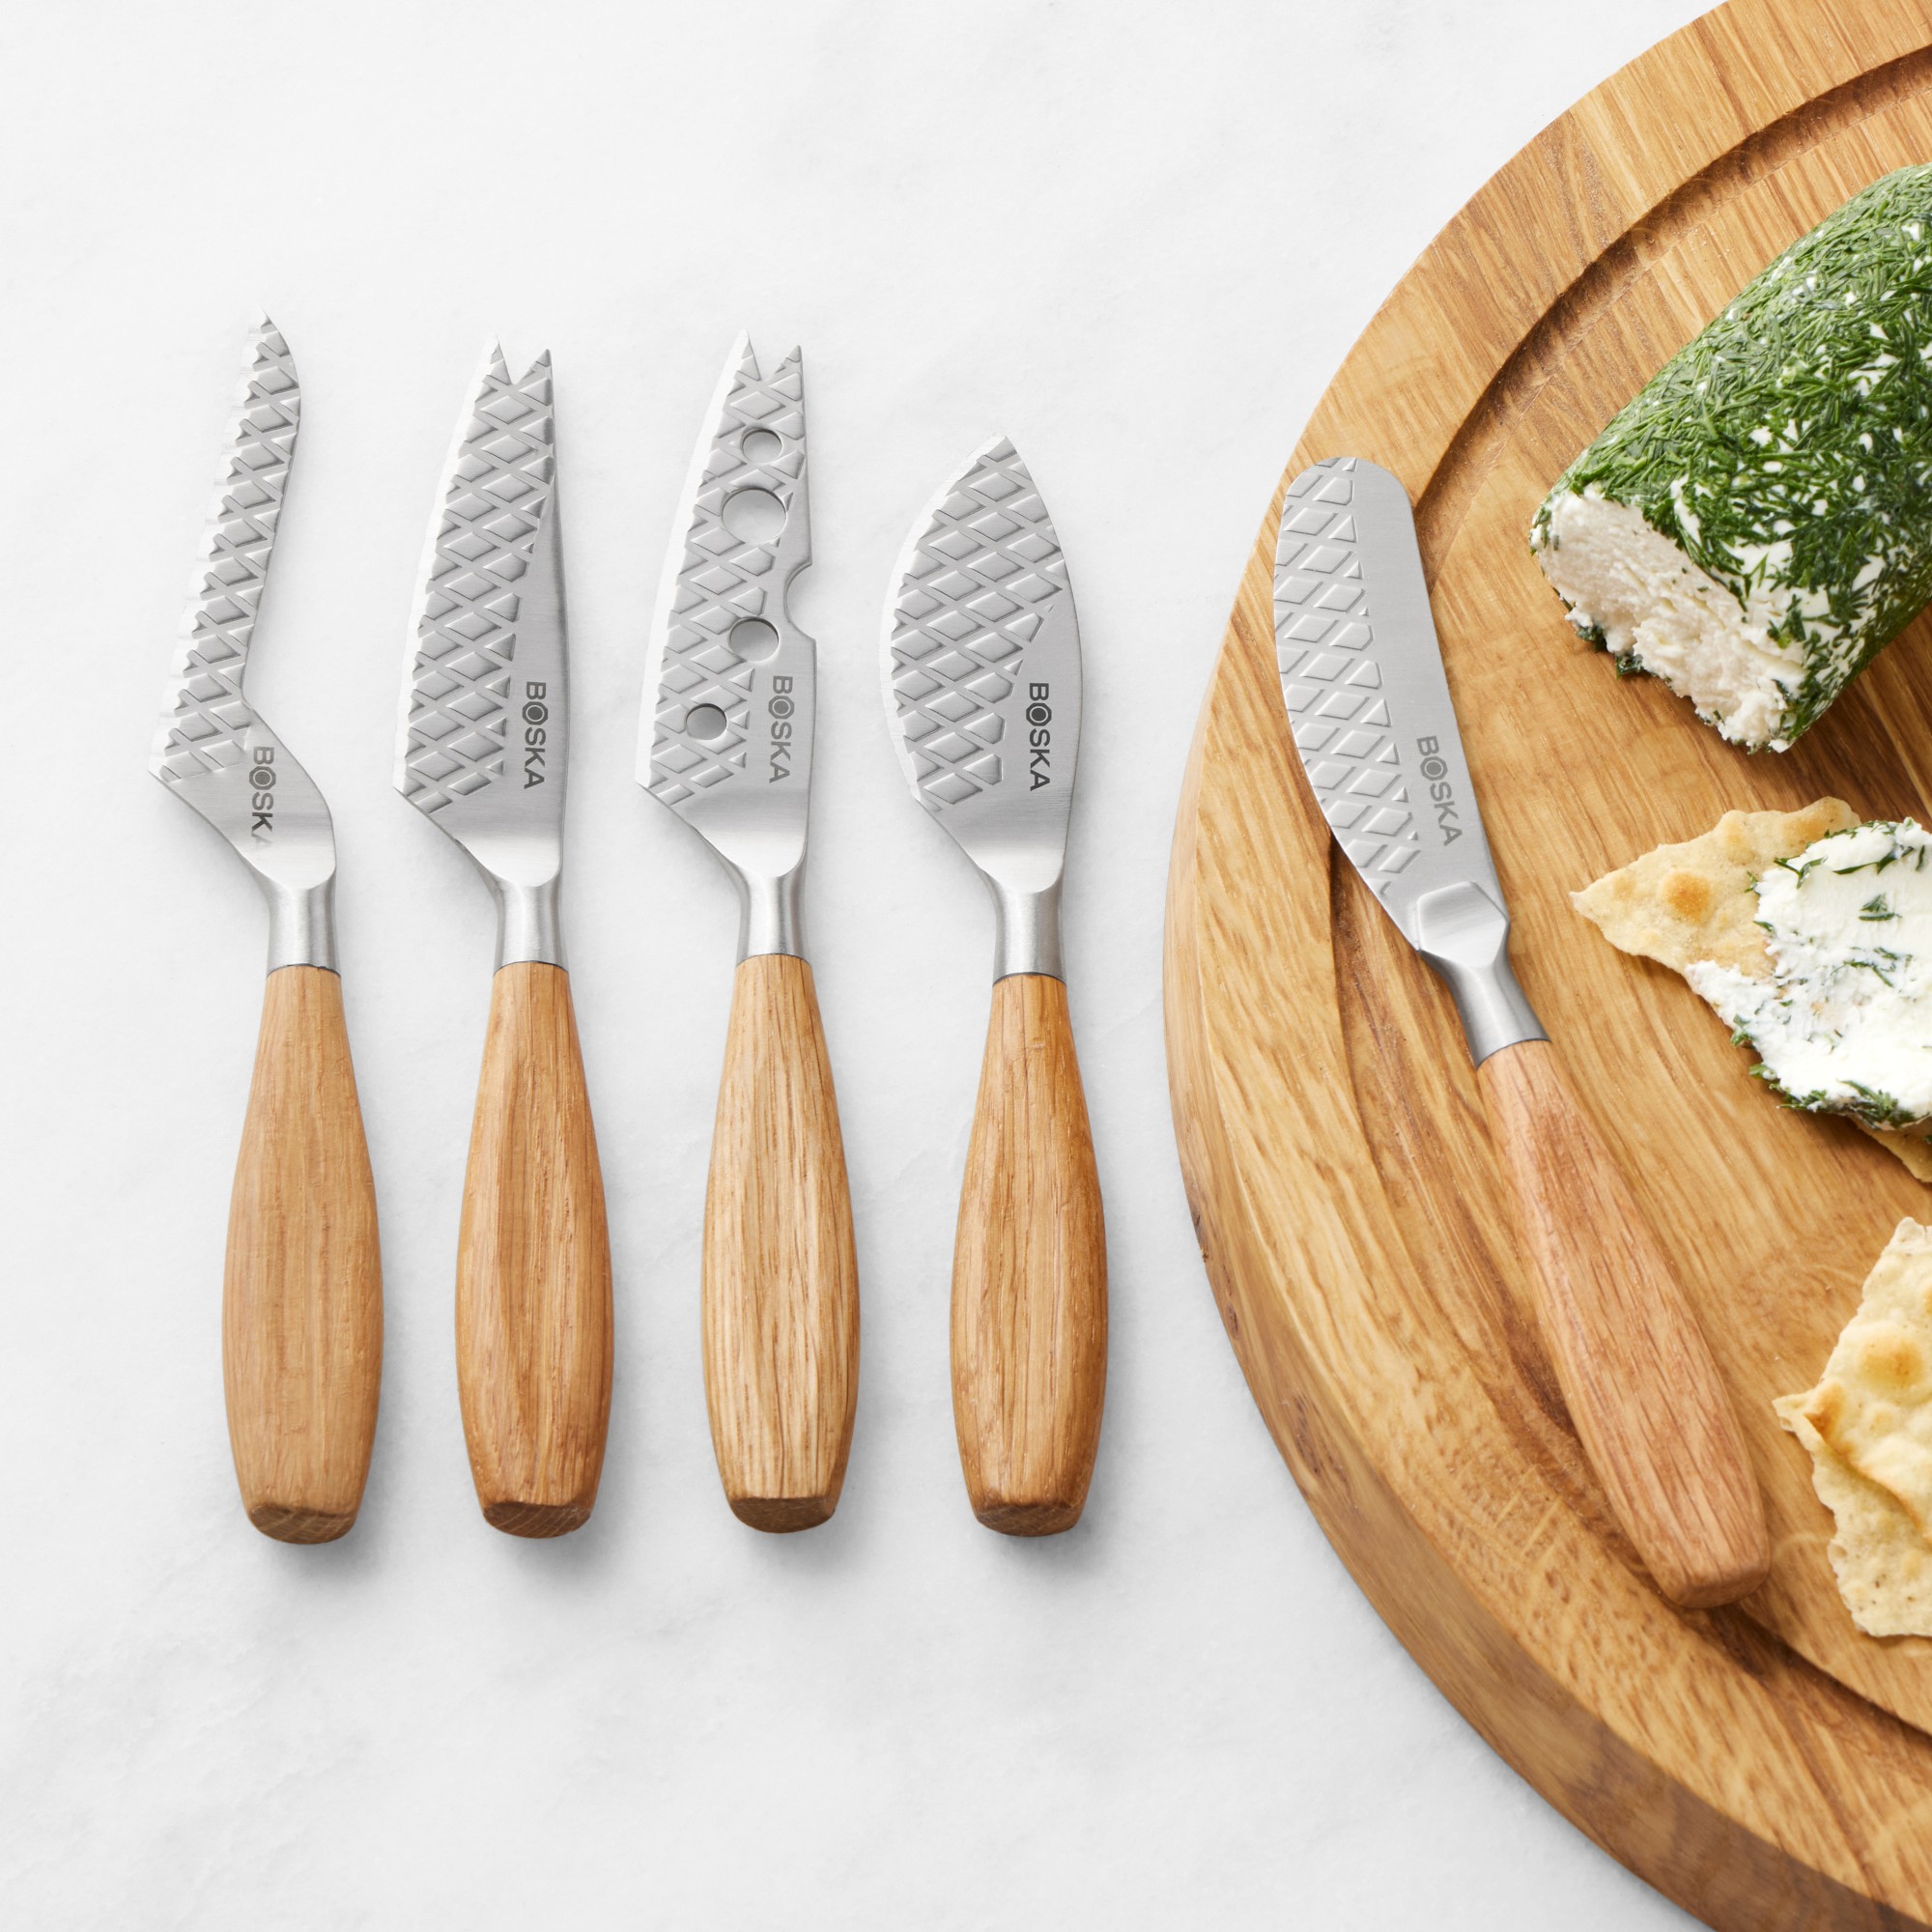 Oslo 5-Piece Cheese Knives Set